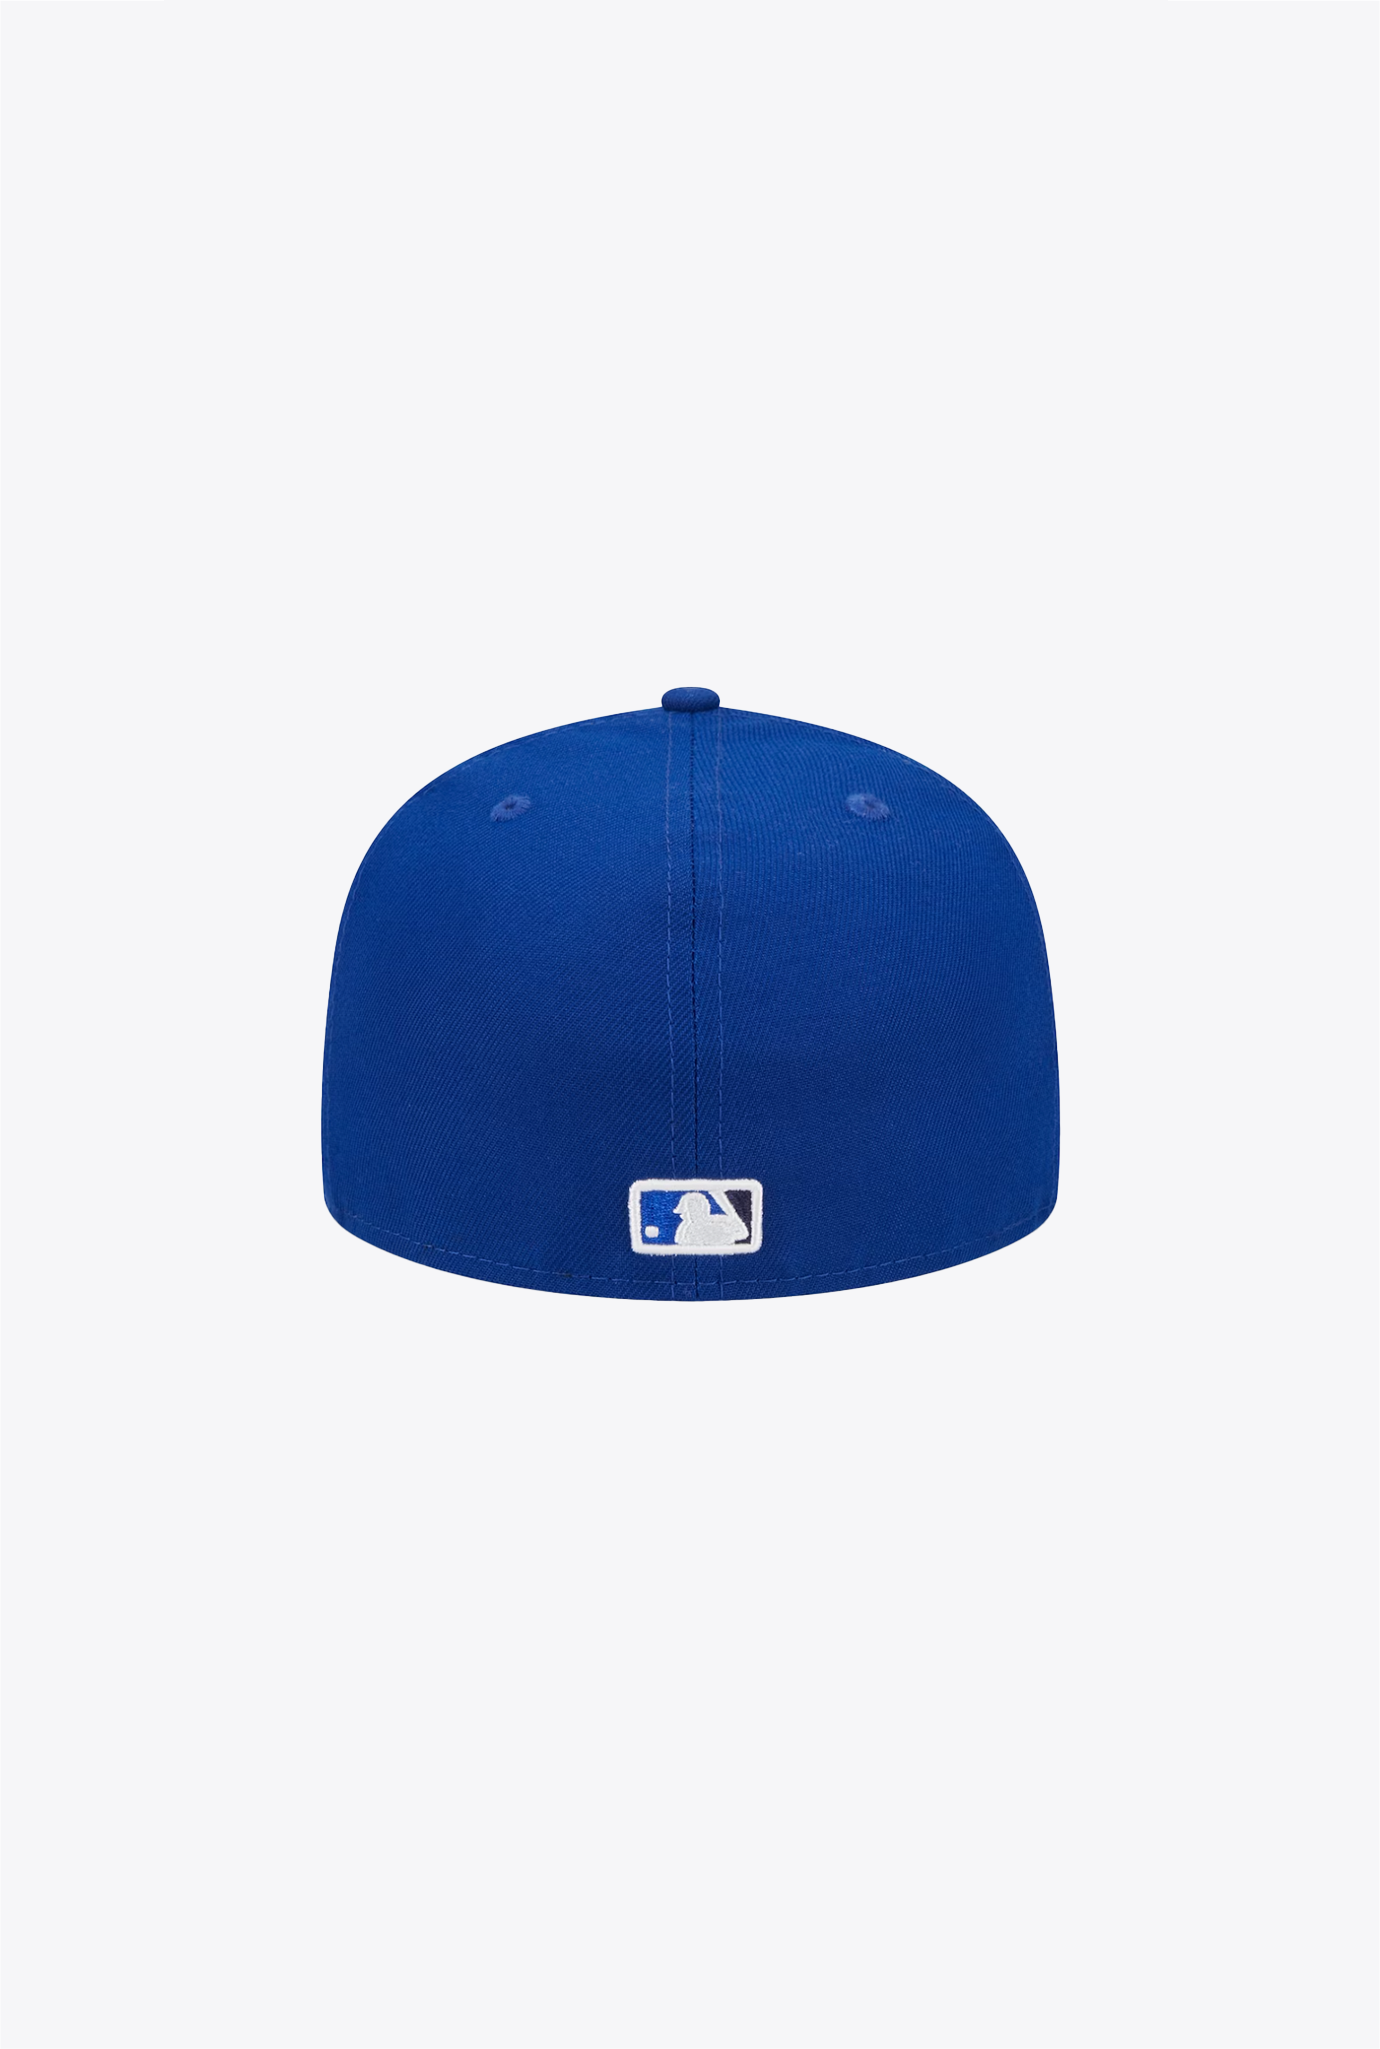 Toronto Blue Jays All-Star Game 2023 59FIFTY - Royal